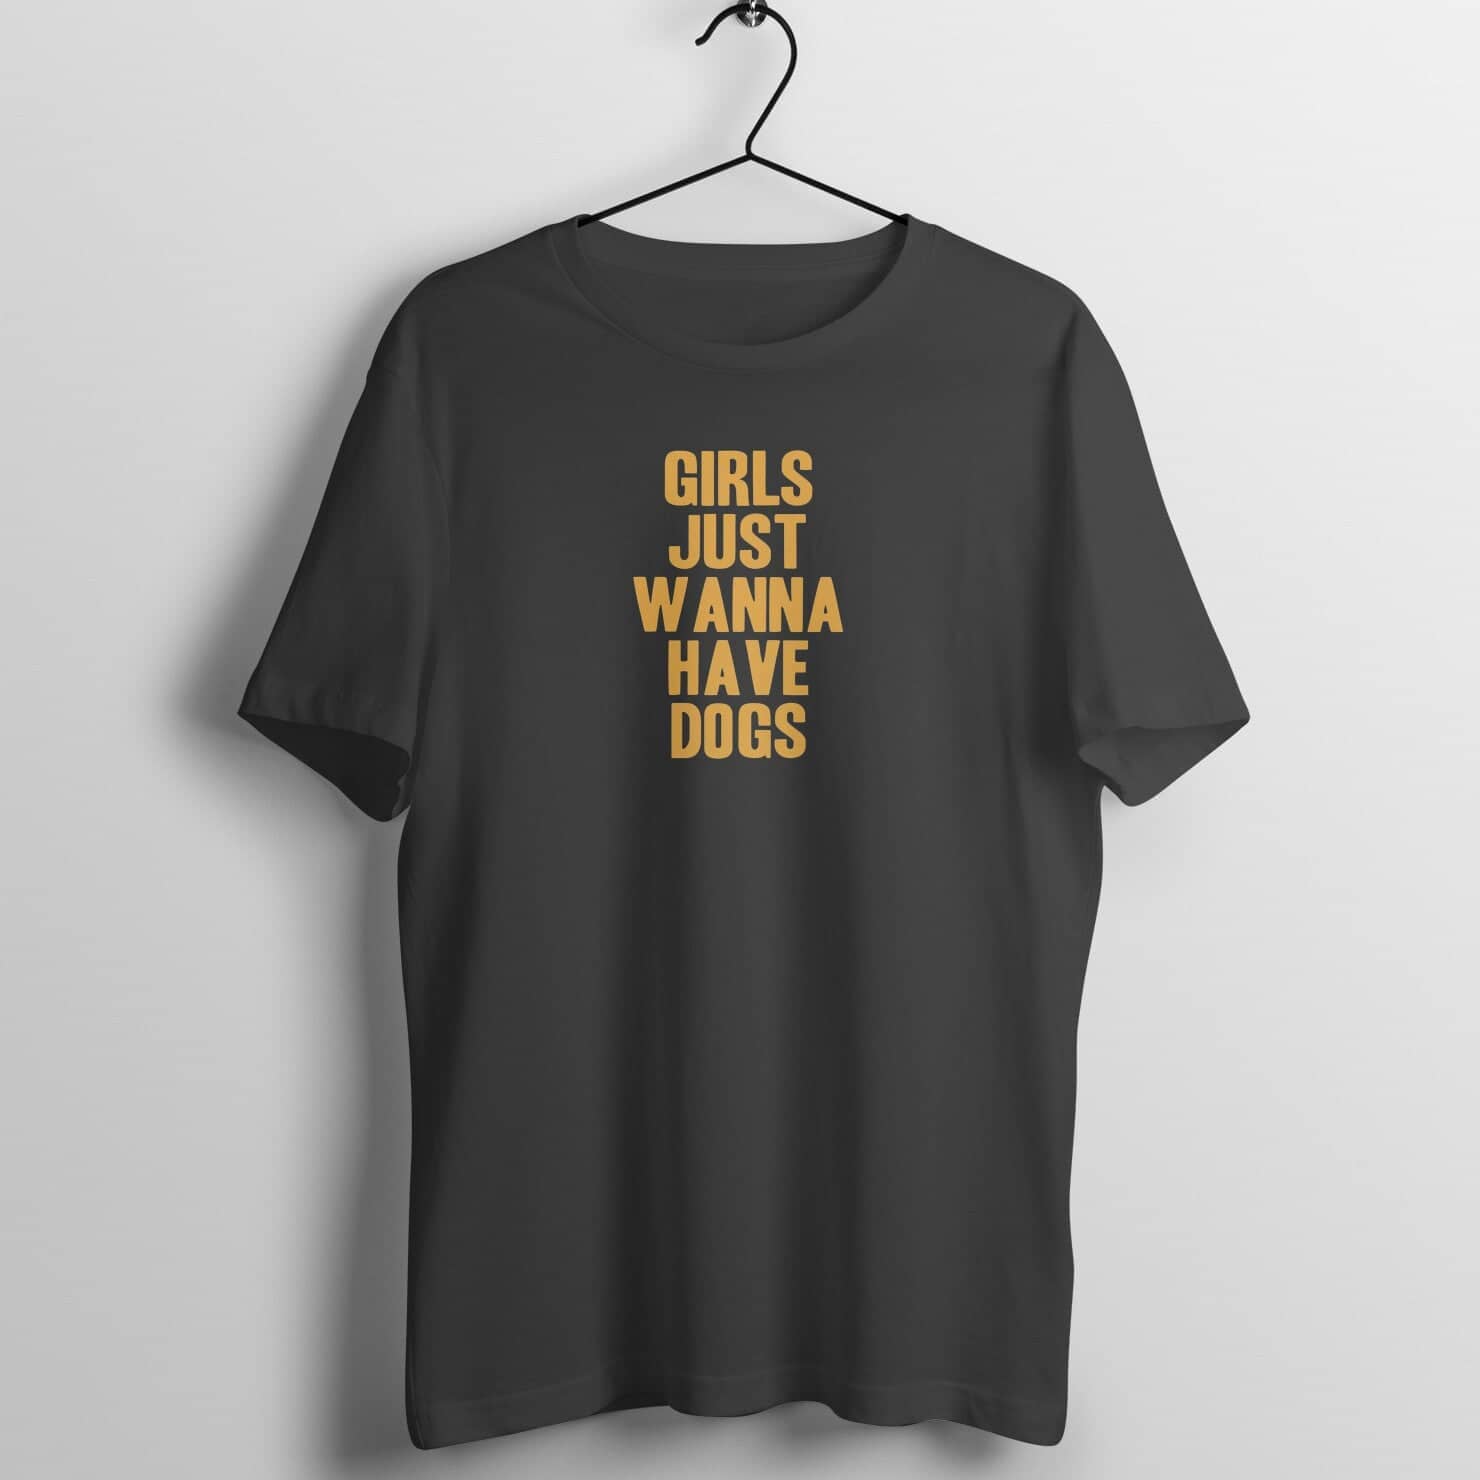 Girls Just Wanna Have Dogs Exclusive Black T Shirt for Women freeshipping - Catch My Drift India